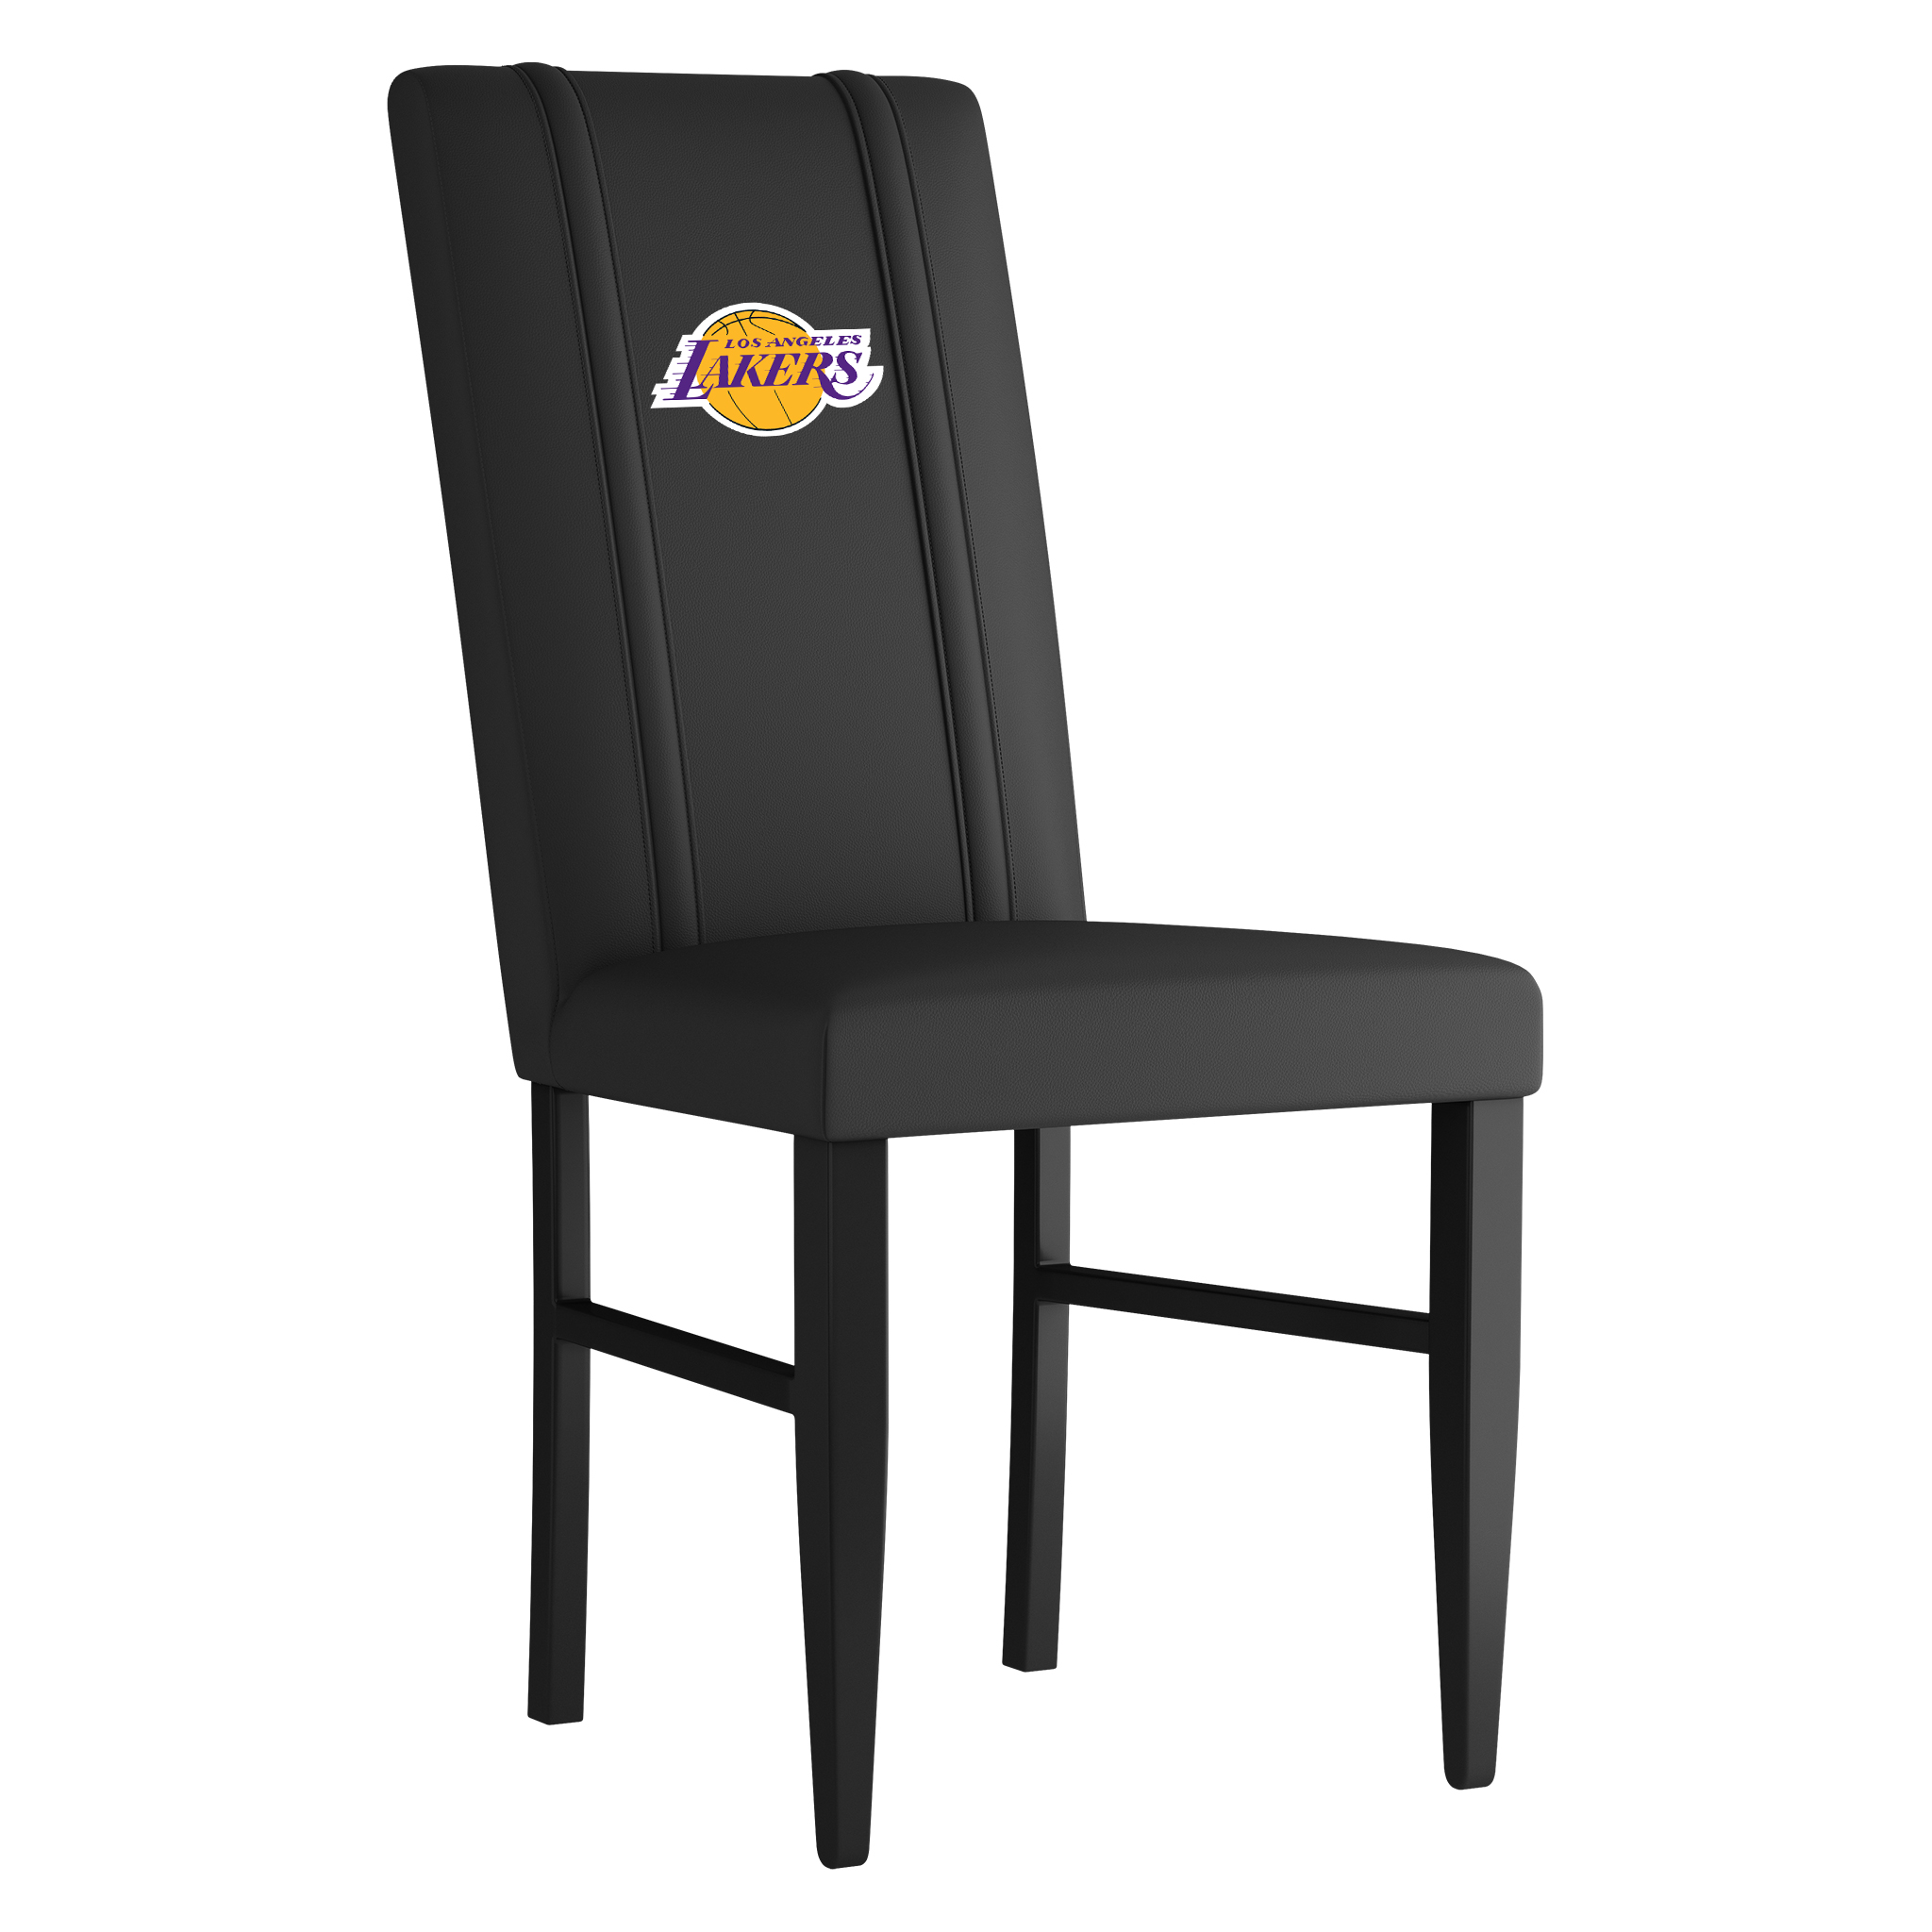 Los Angeles Lakers Side Chair 2000 With Los Angeles Lakers Logo